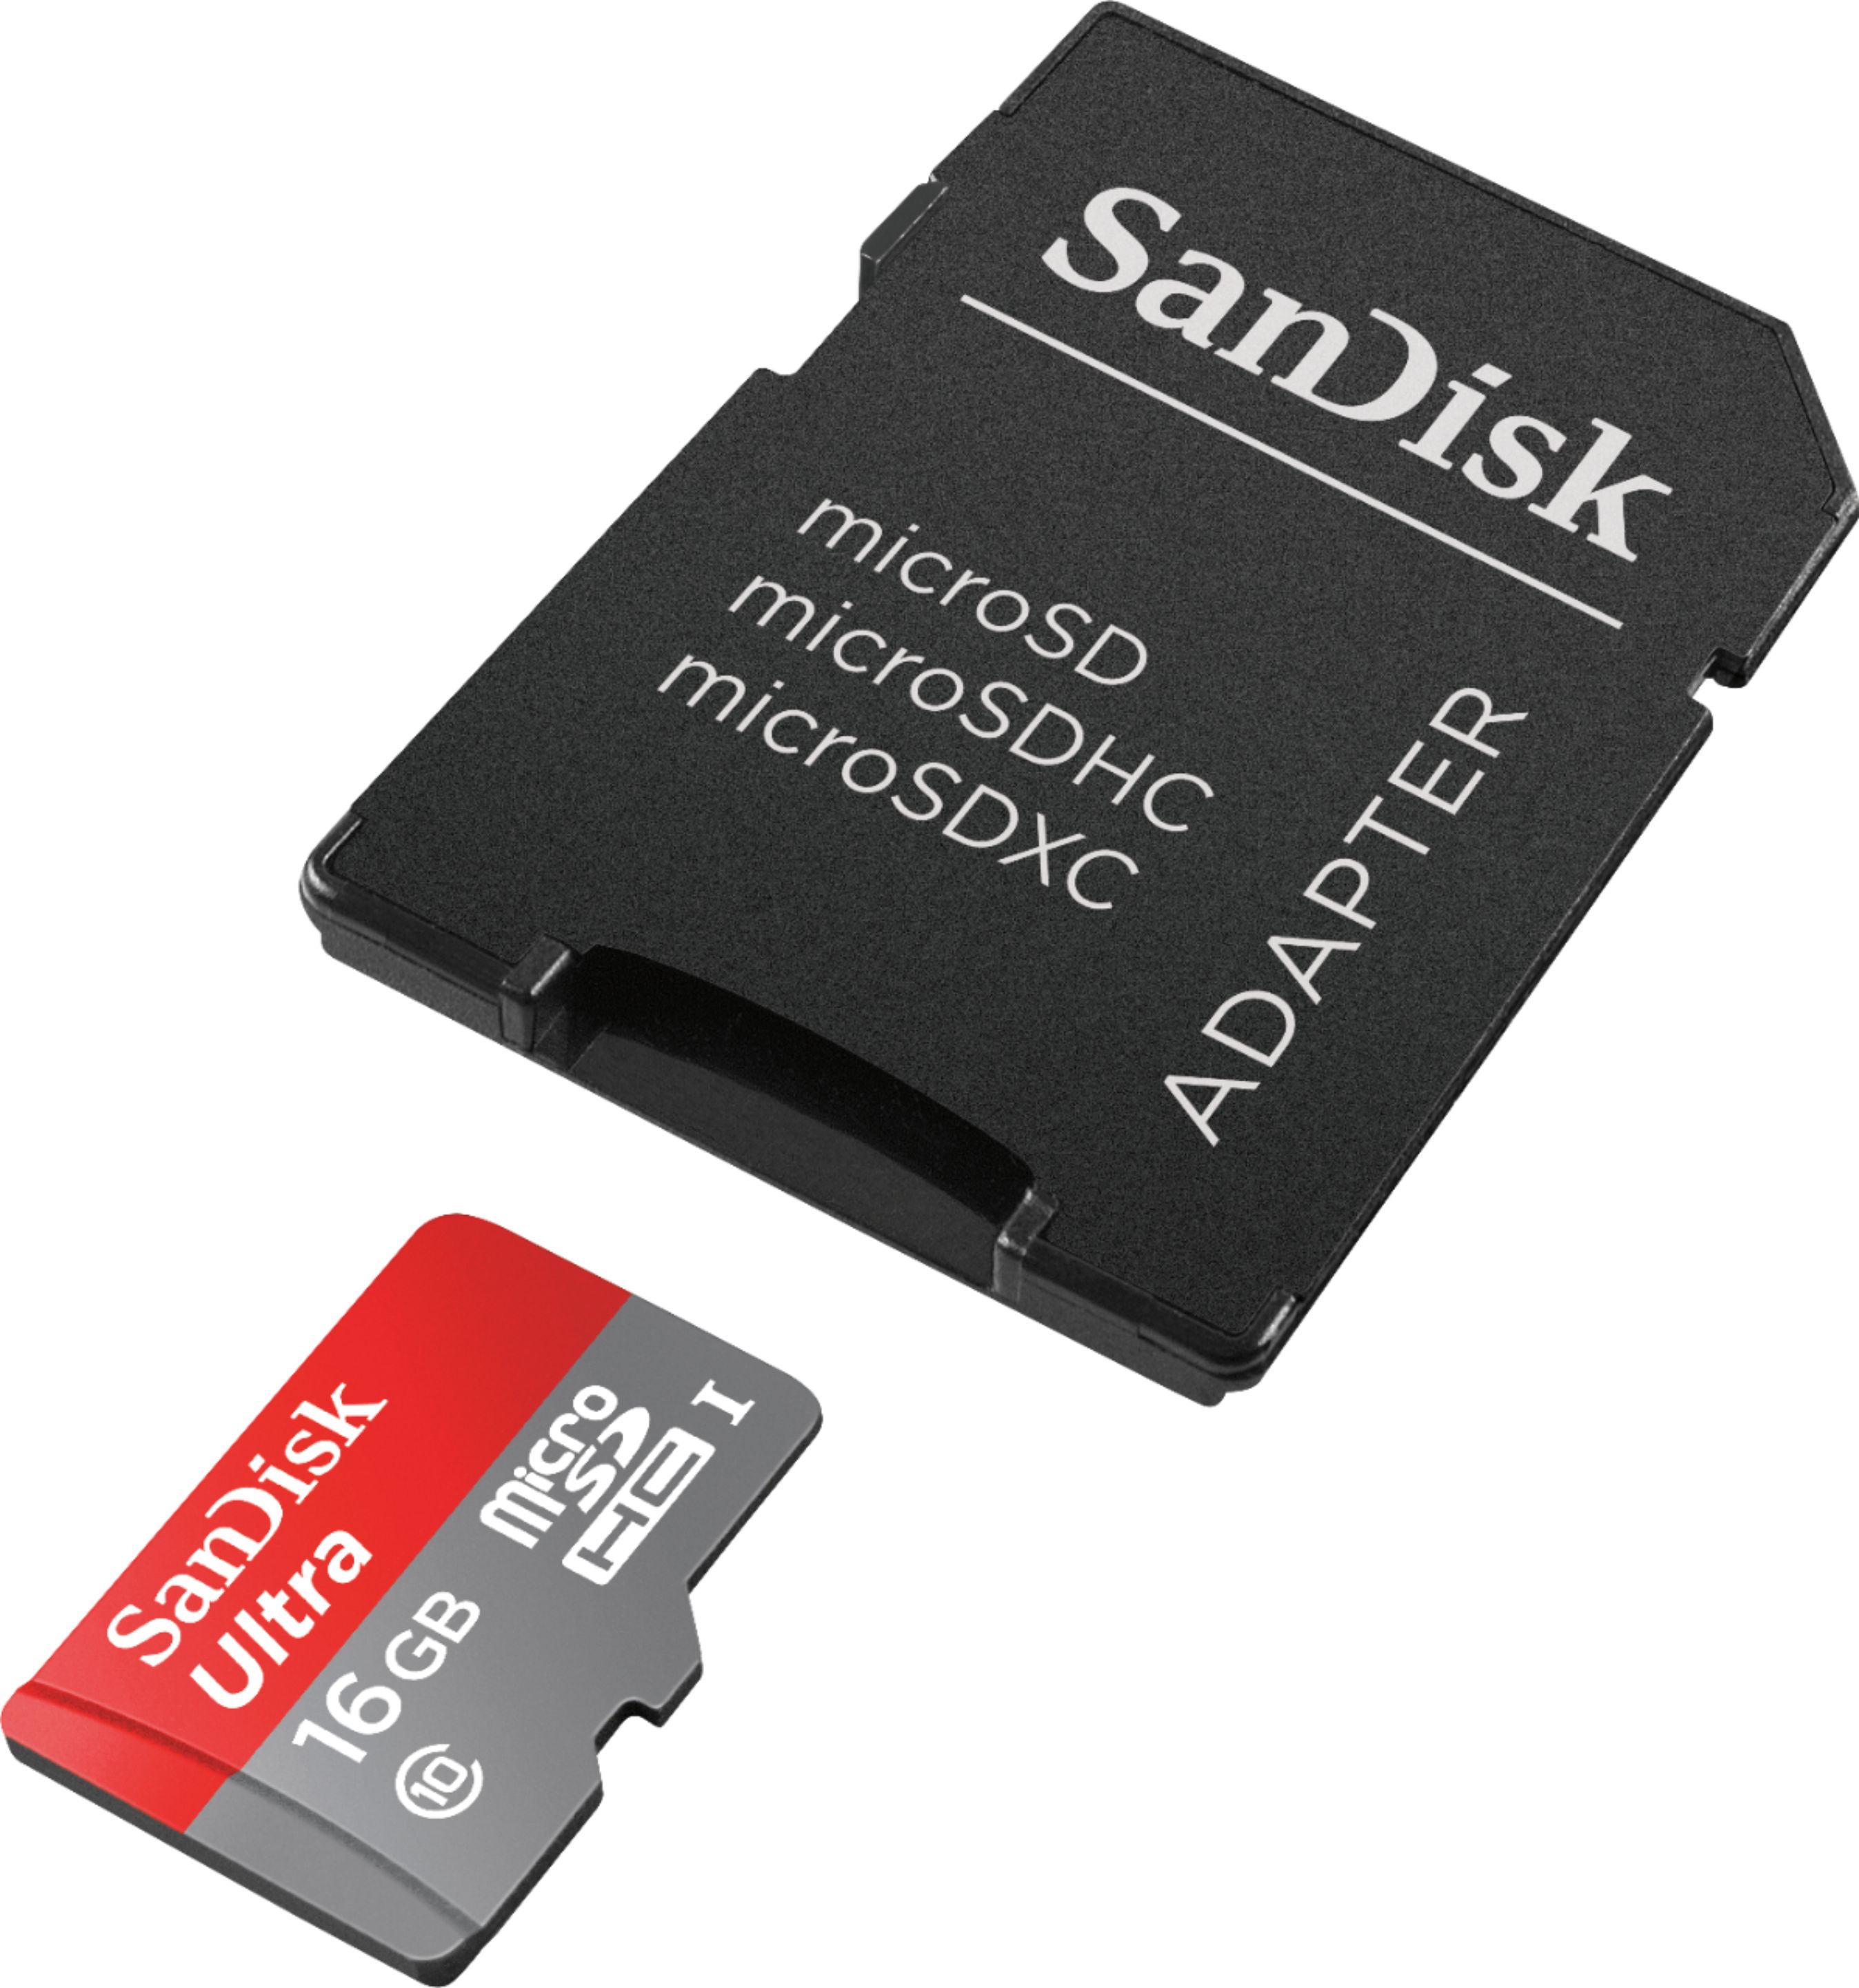 Combo Card Reader - With Everything But Stromboli 16GB SDSDUNC-016G-GN6IN TM 5 Pack Bundle UHS-I Class 10 SD Flash Memory Card Retail SanDisk Ultra 